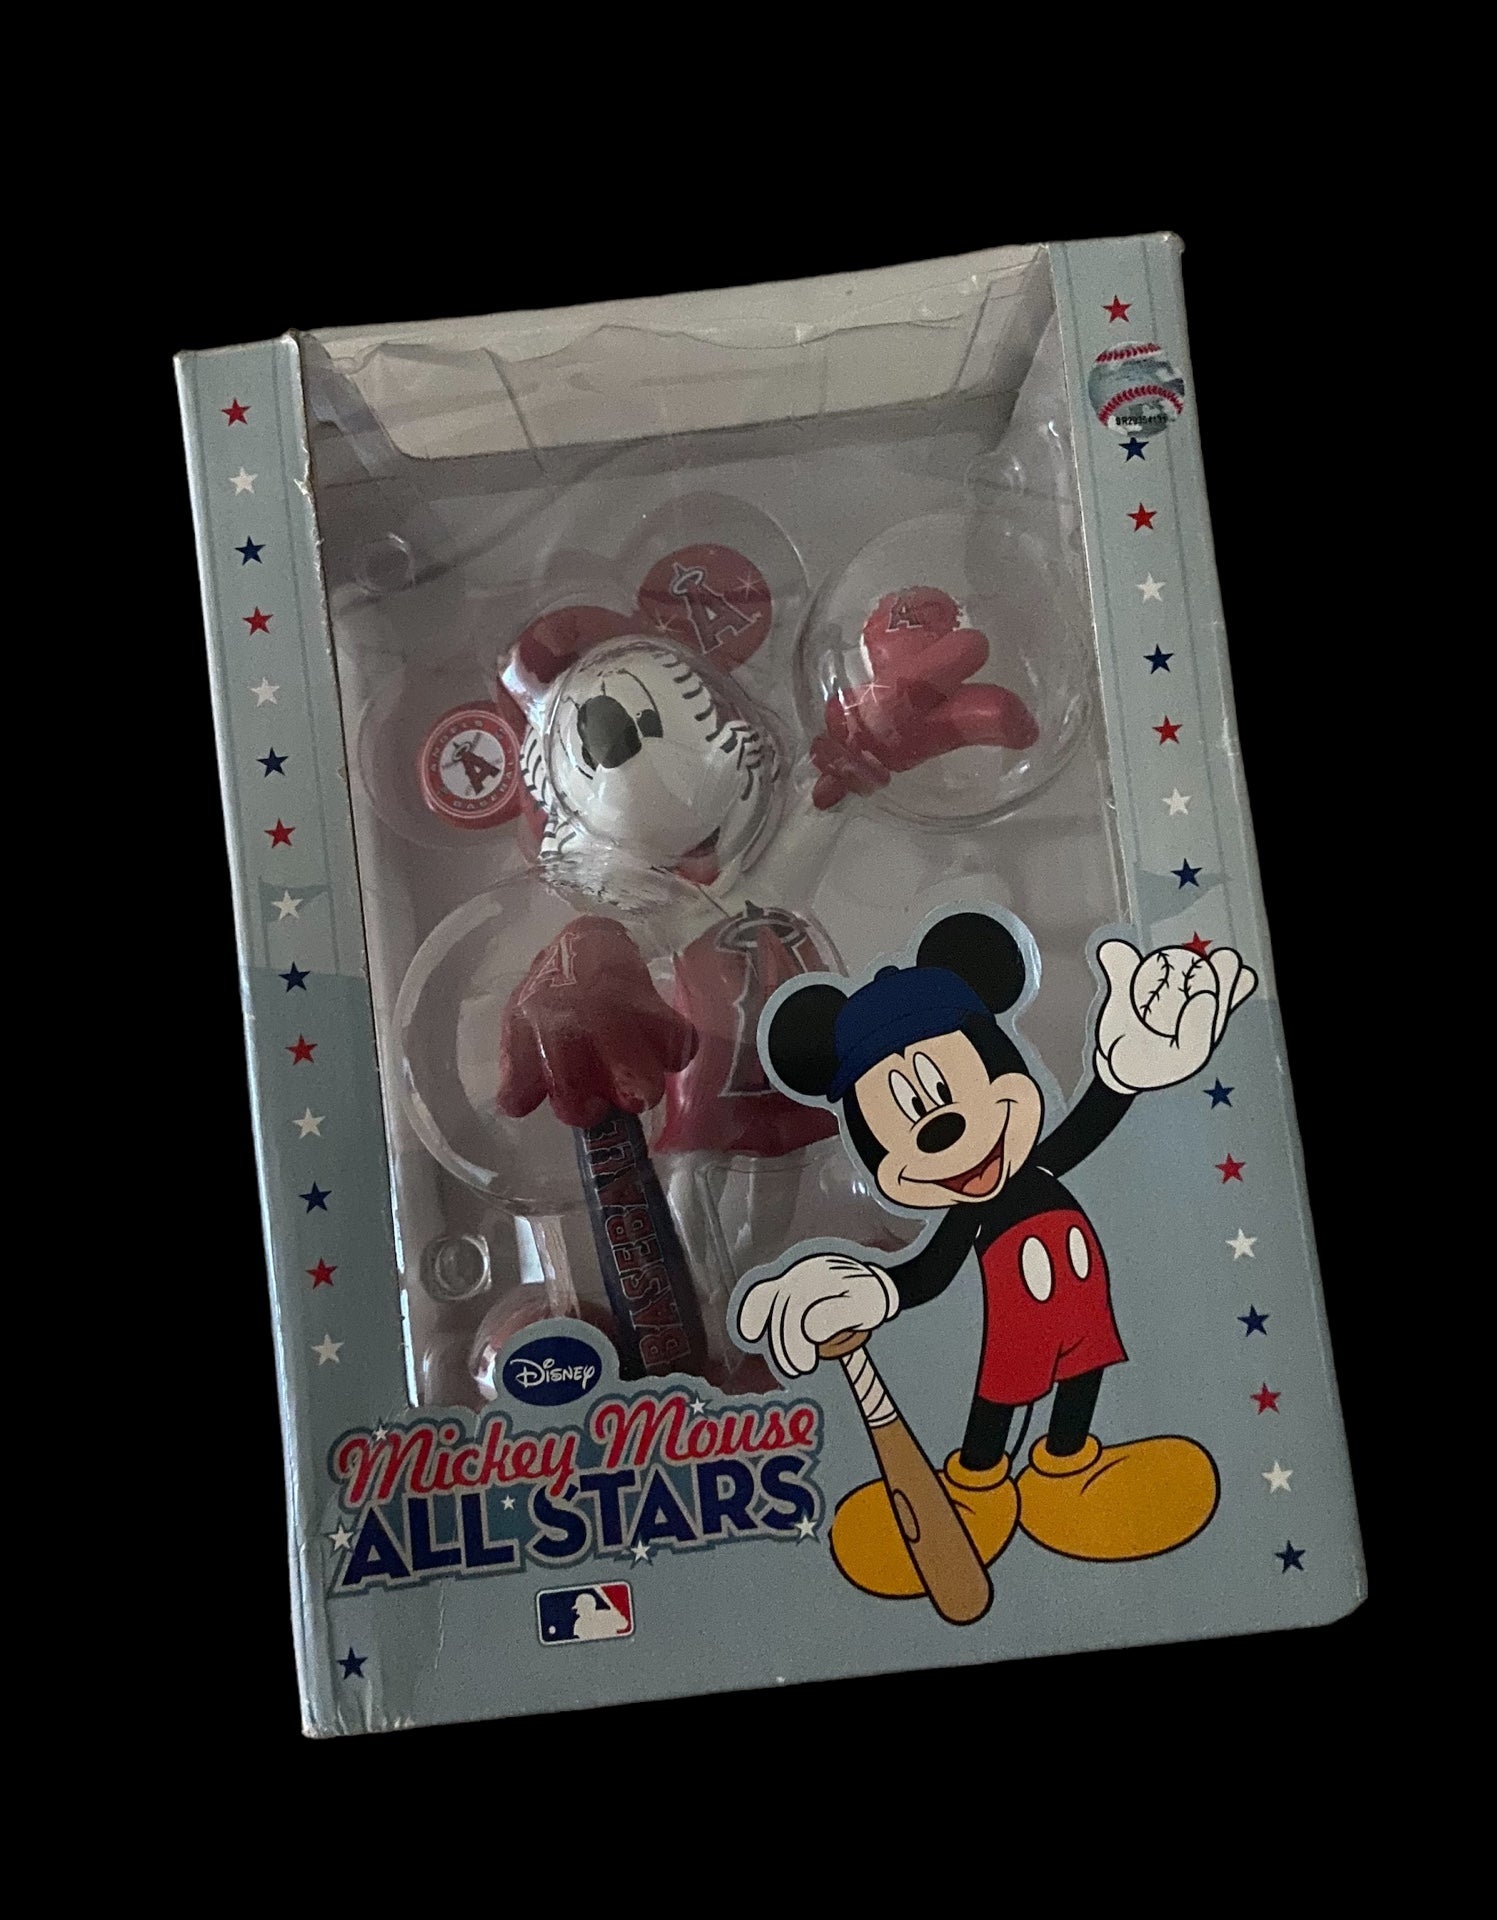 All-Star game and Mickey Mouses all around!